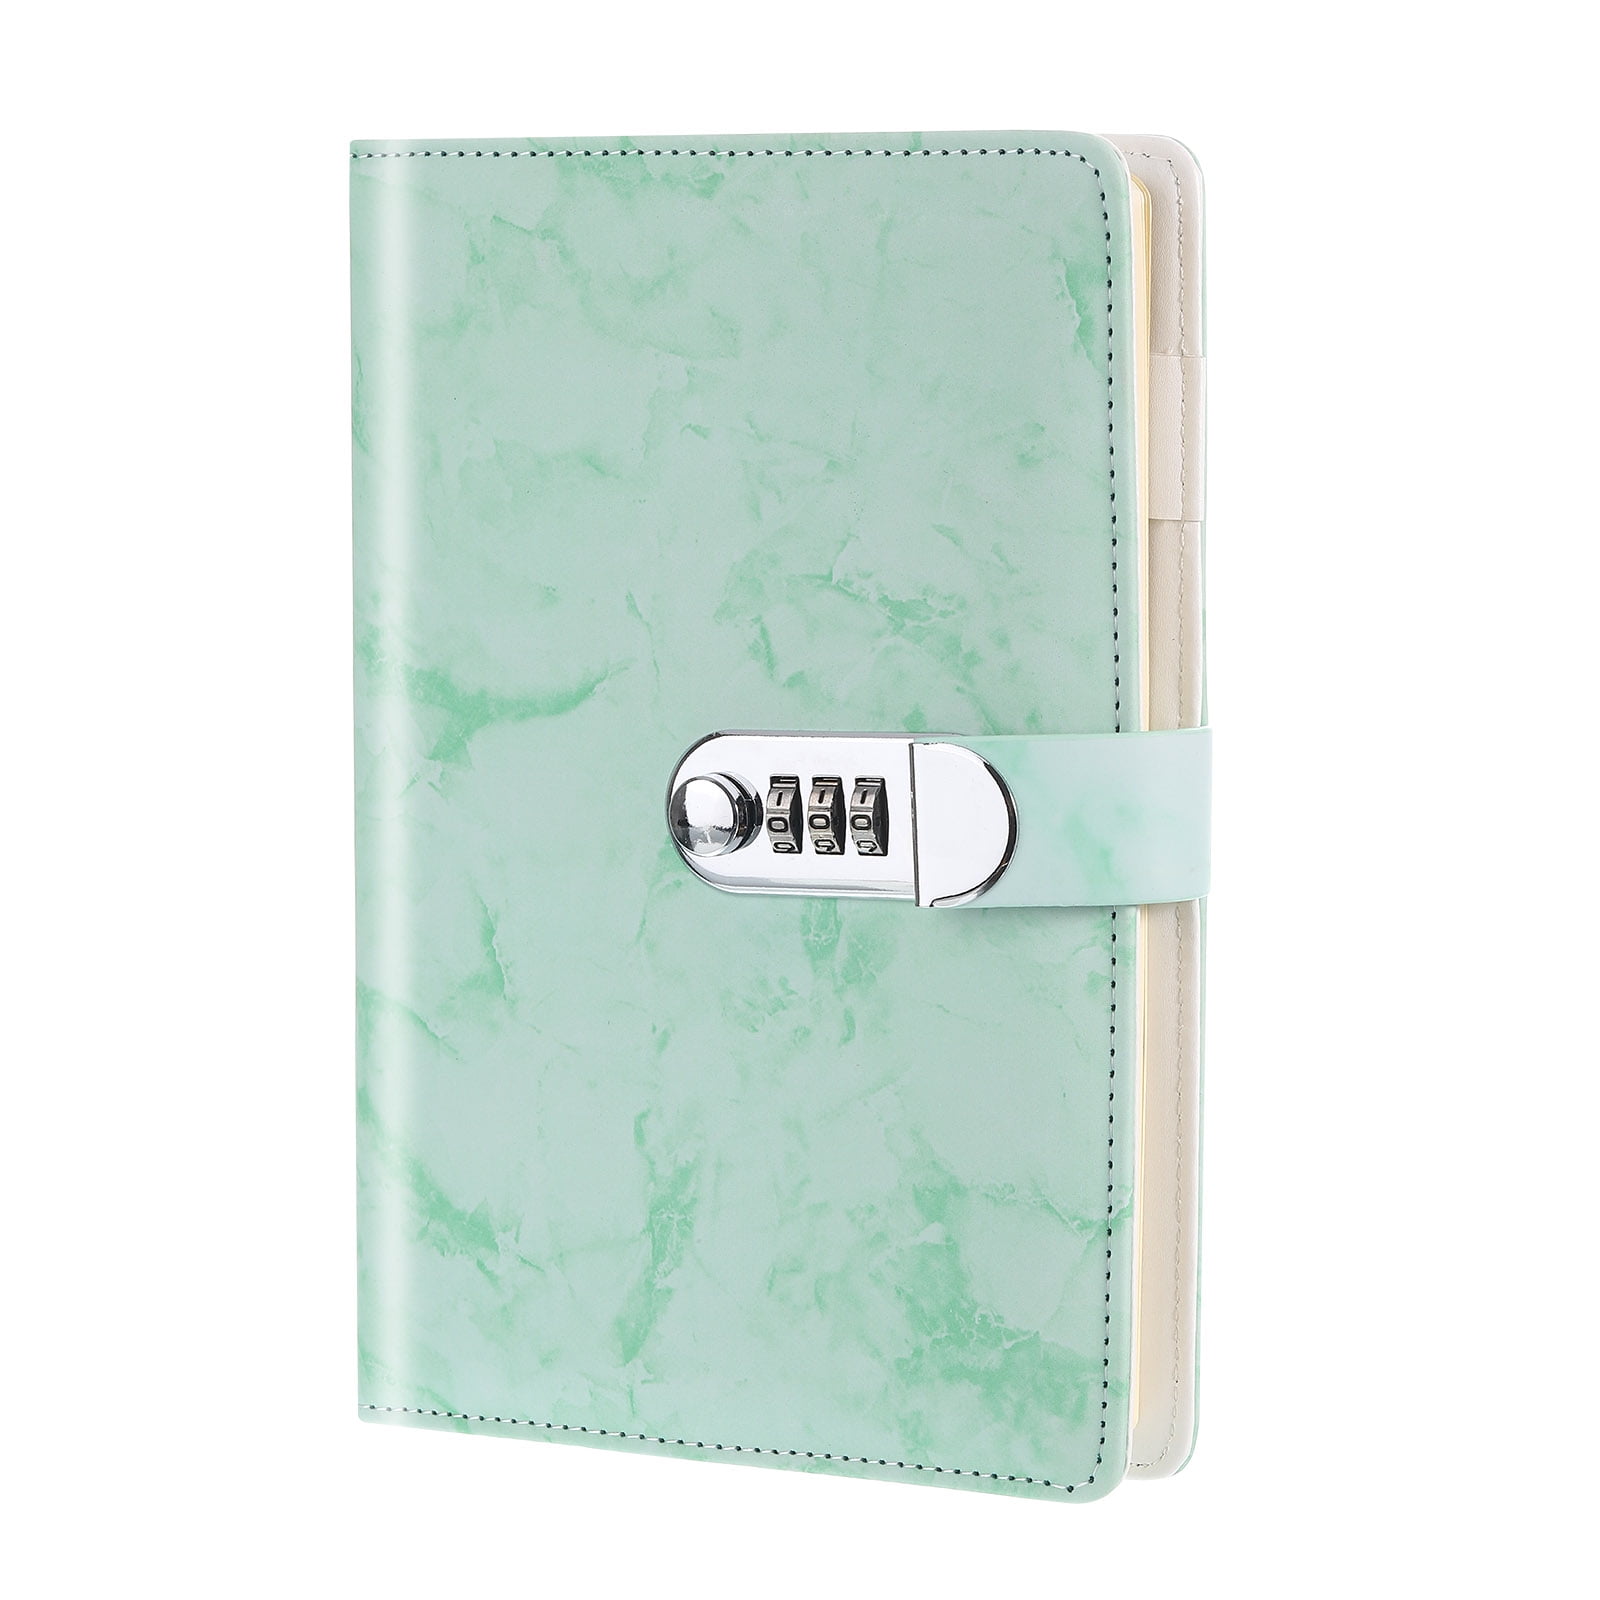 A5 Diary with Lock, 1pcs Journal with Lock Cute Journaling Leather ...